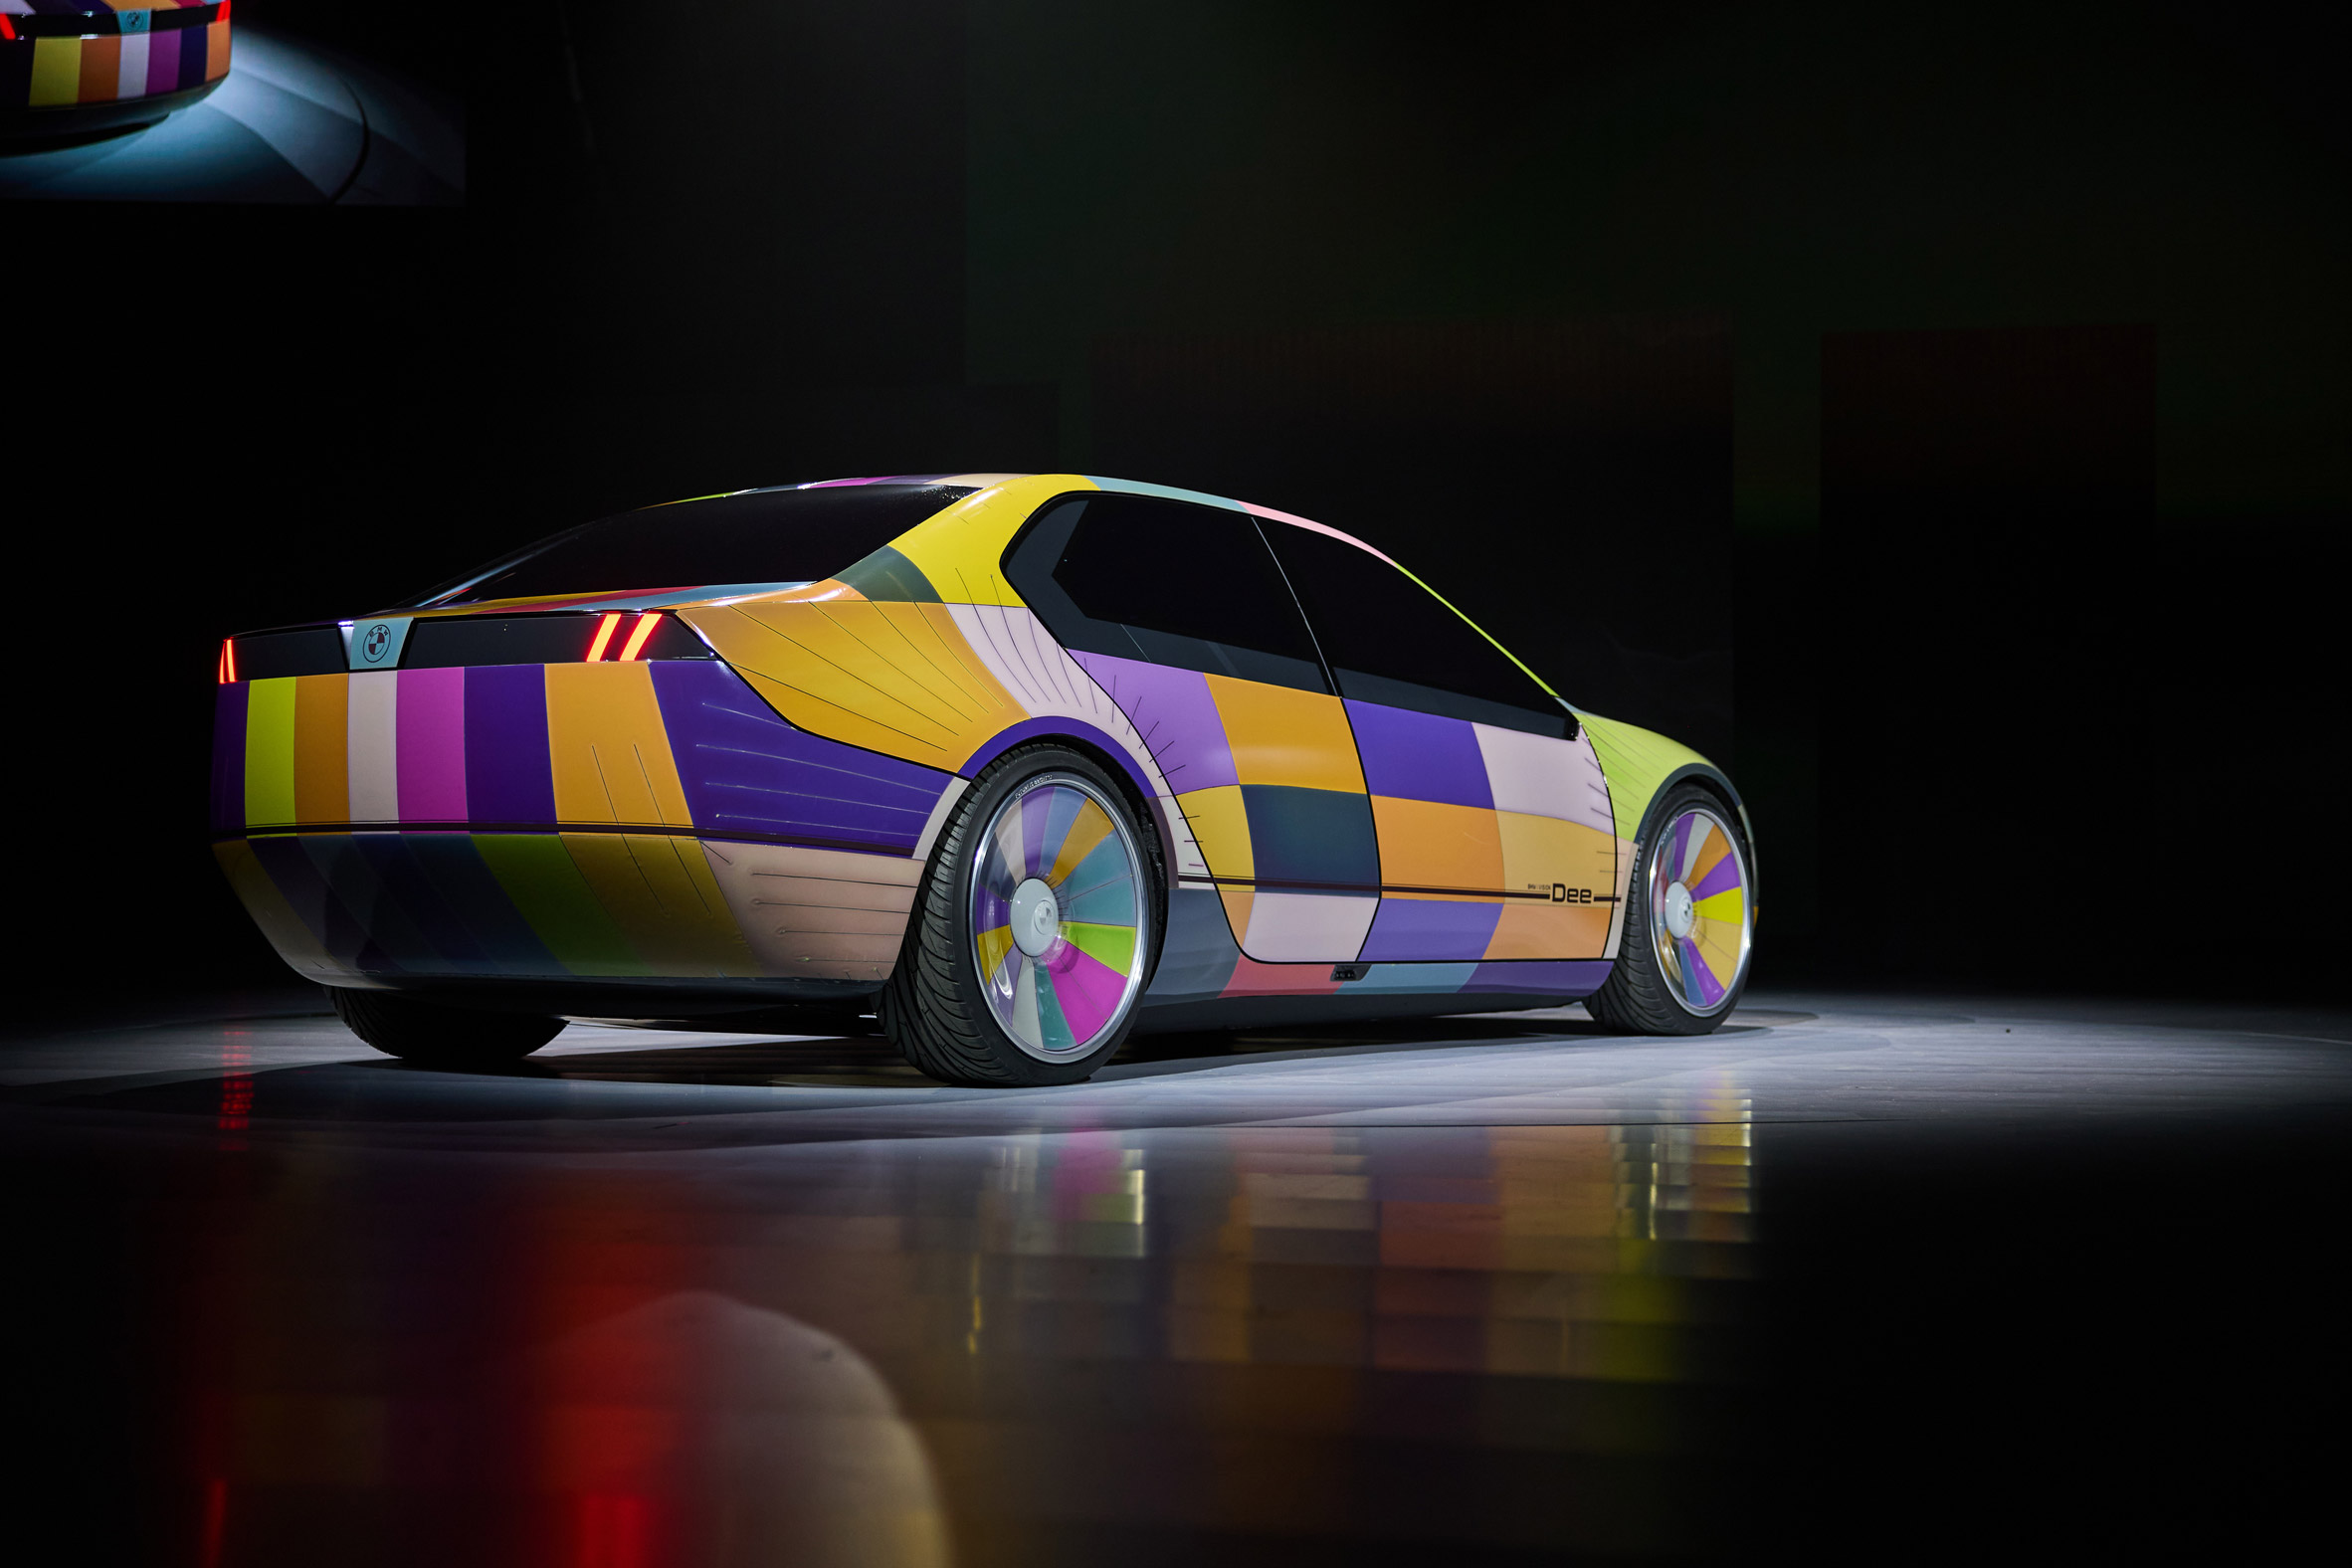 BMW's colour-changing car at CES